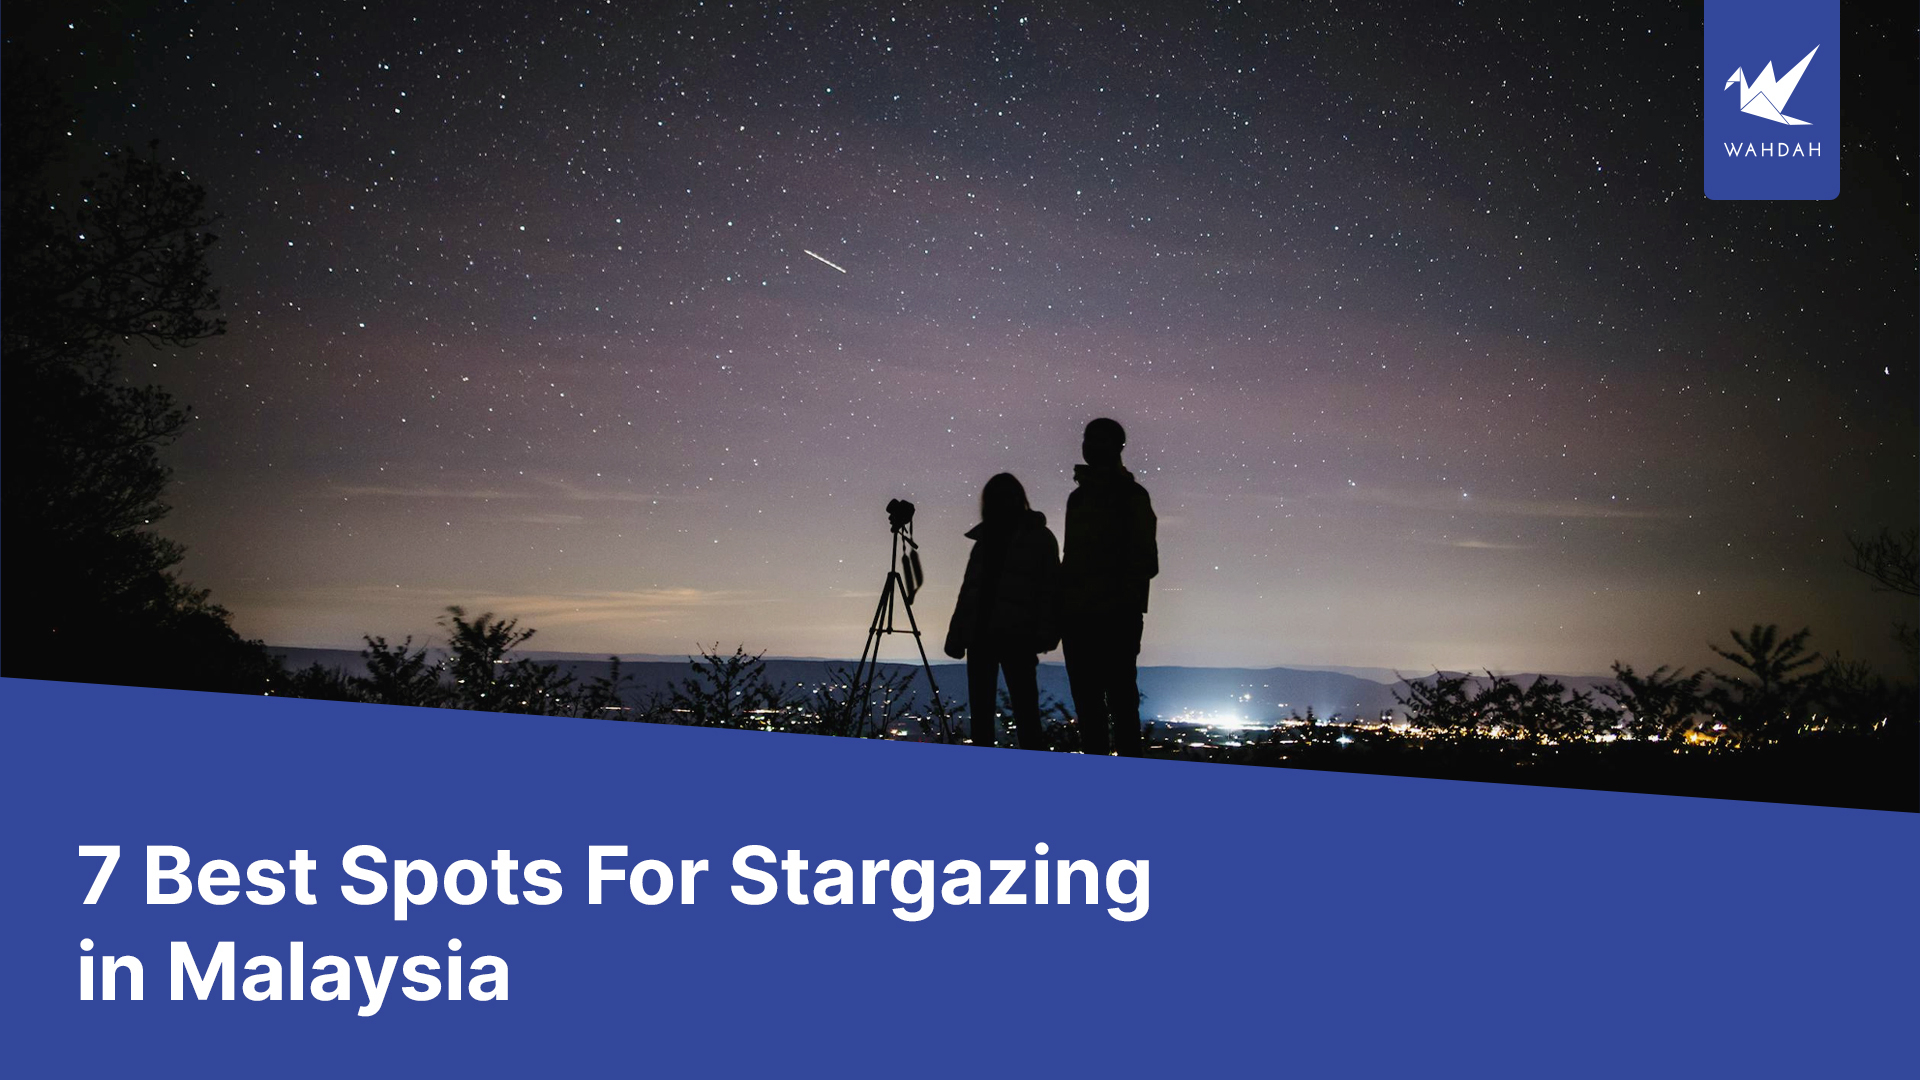 7 Best Spots For Stargazing in Malaysia